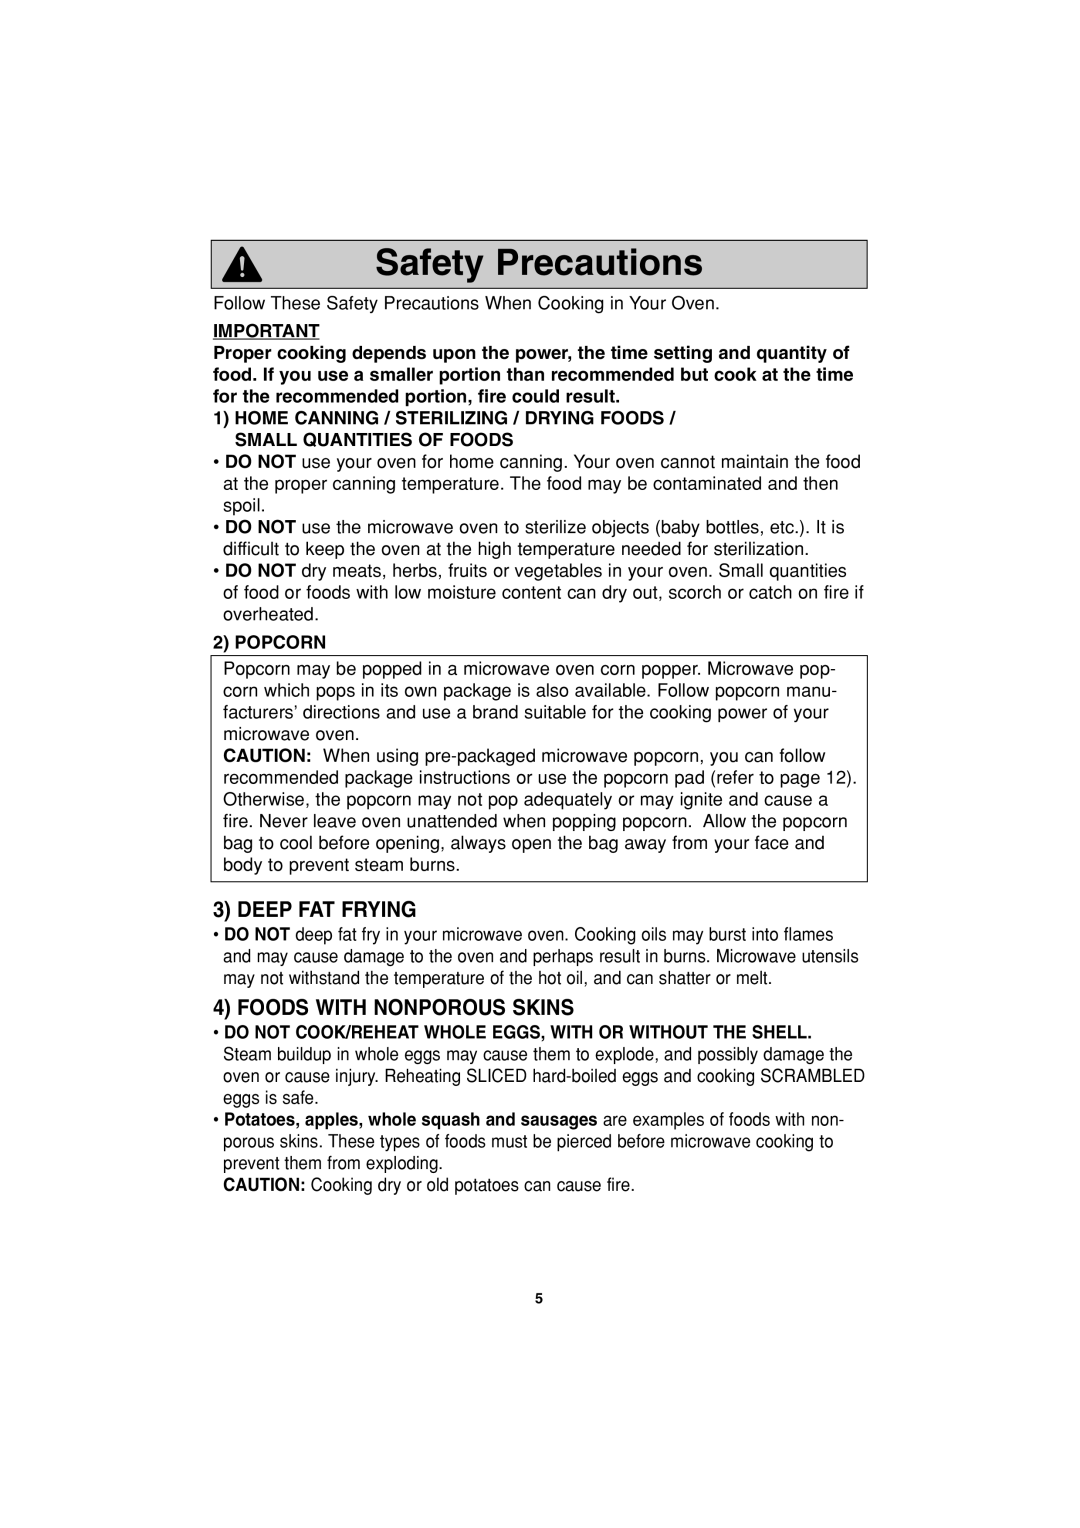 Panasonic NN-S503, NN-S553 important safety instructions Safety Precautions, Deep Fat Frying, Foods With Nonporous Skins 